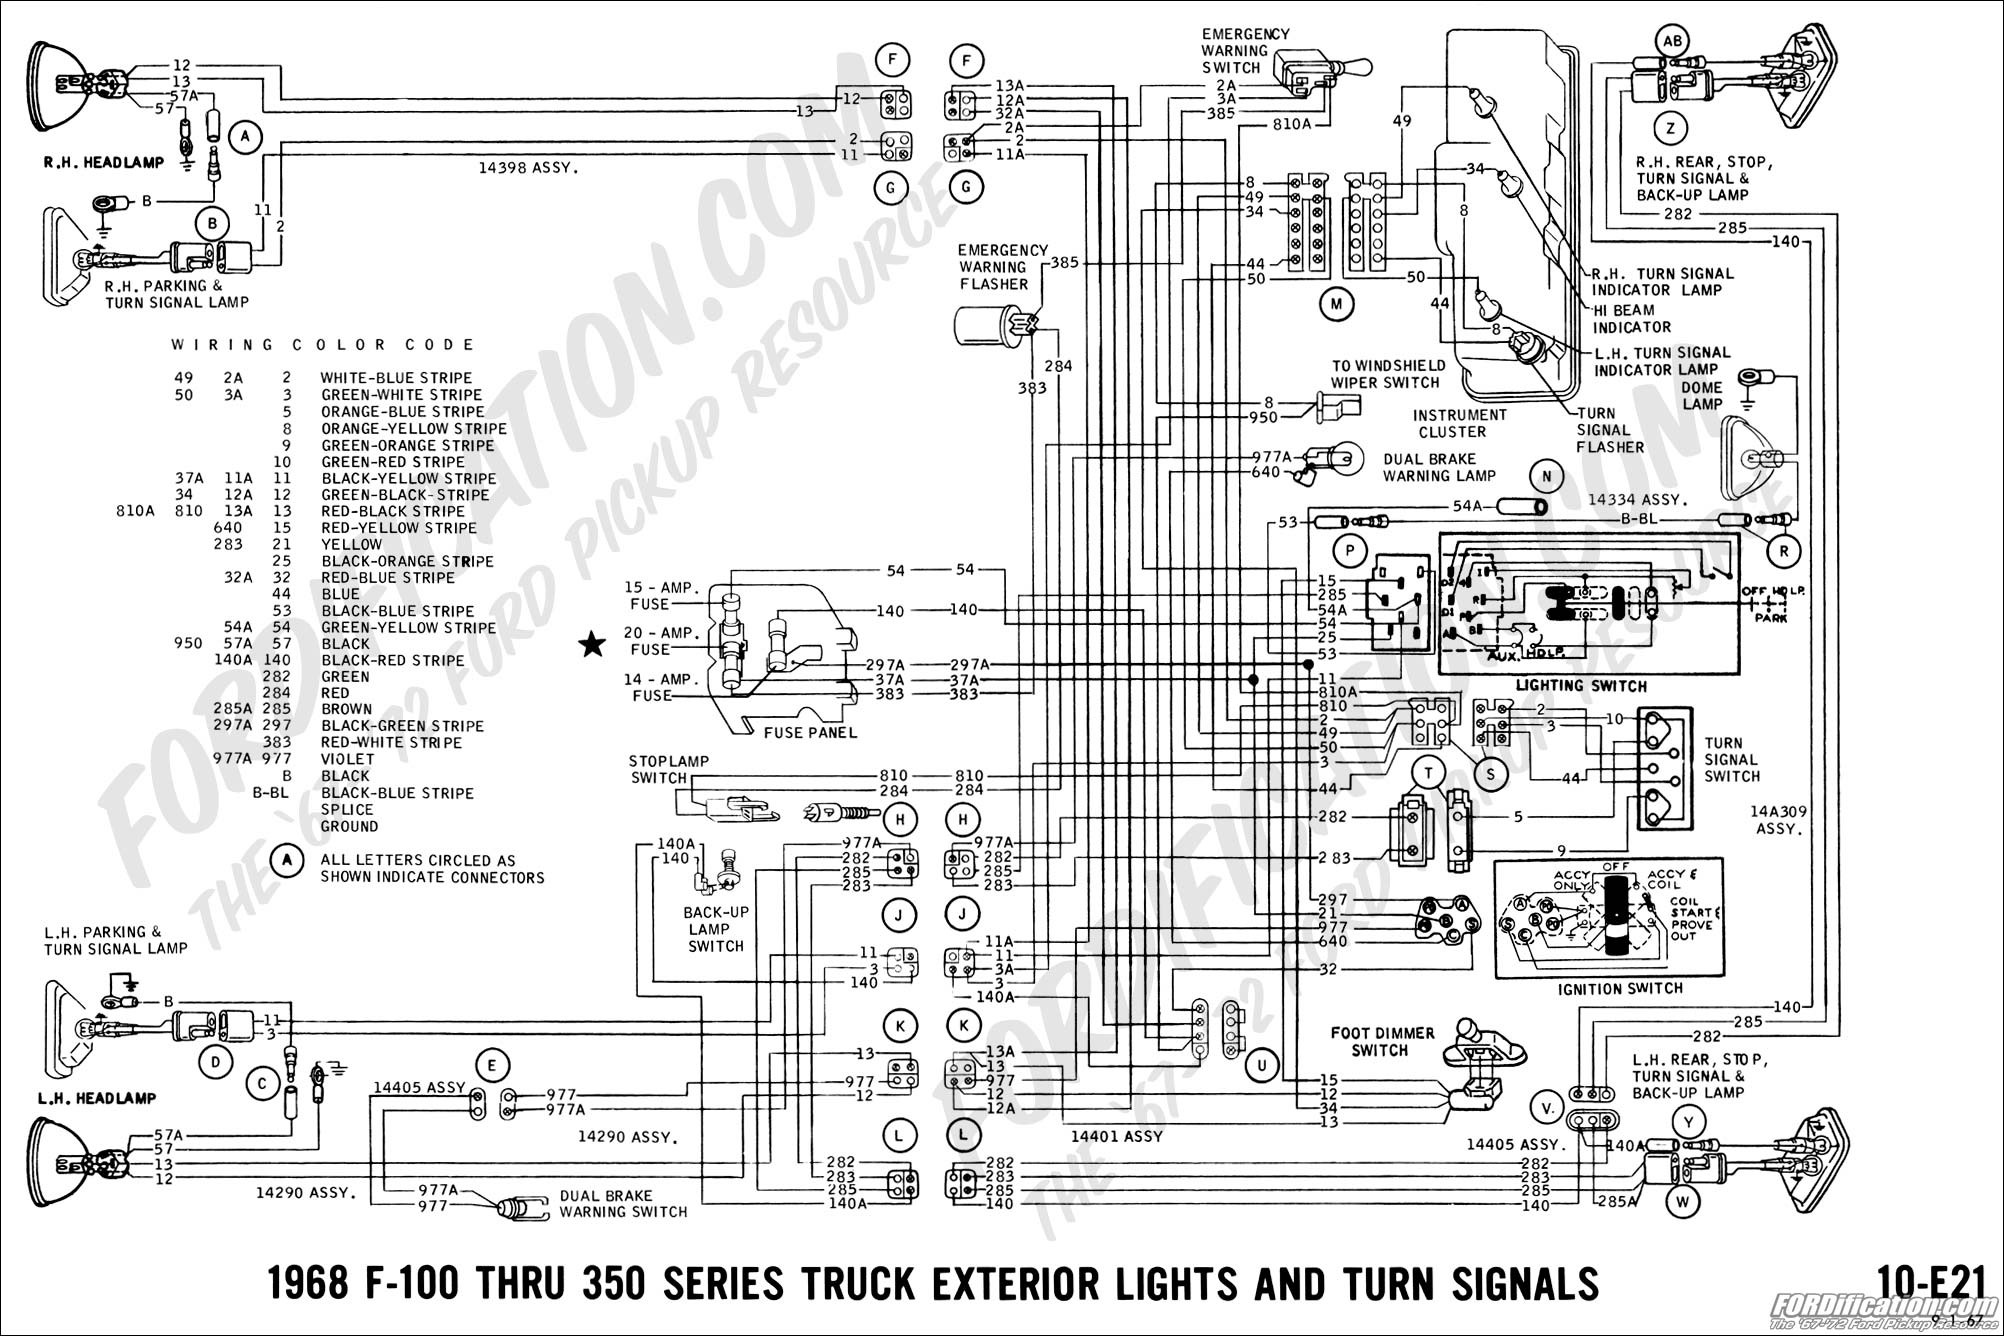 Turn Signal Wiring Diagram ford Truck Technical Drawings and Schematics Section H Wiring Of Turn Signal Wiring Diagram